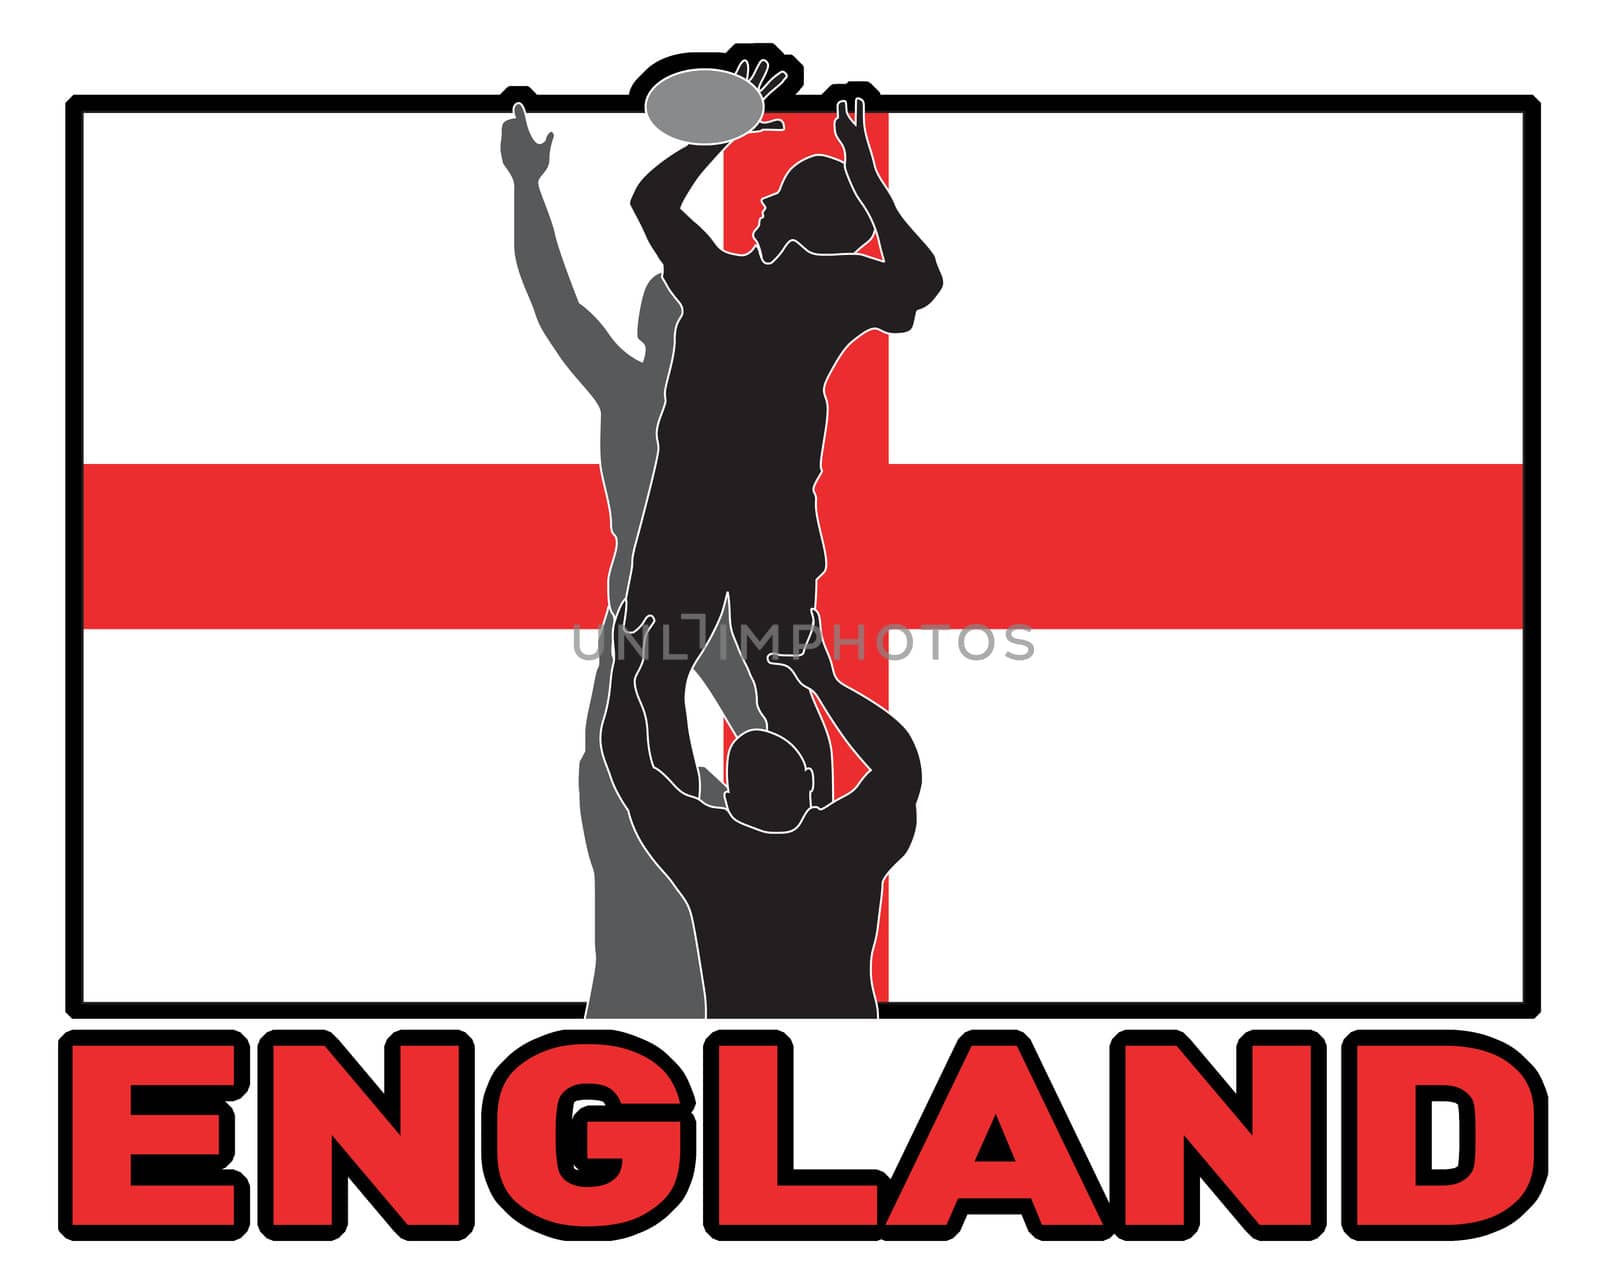 Rugby lineout throw ball england flag by patrimonio